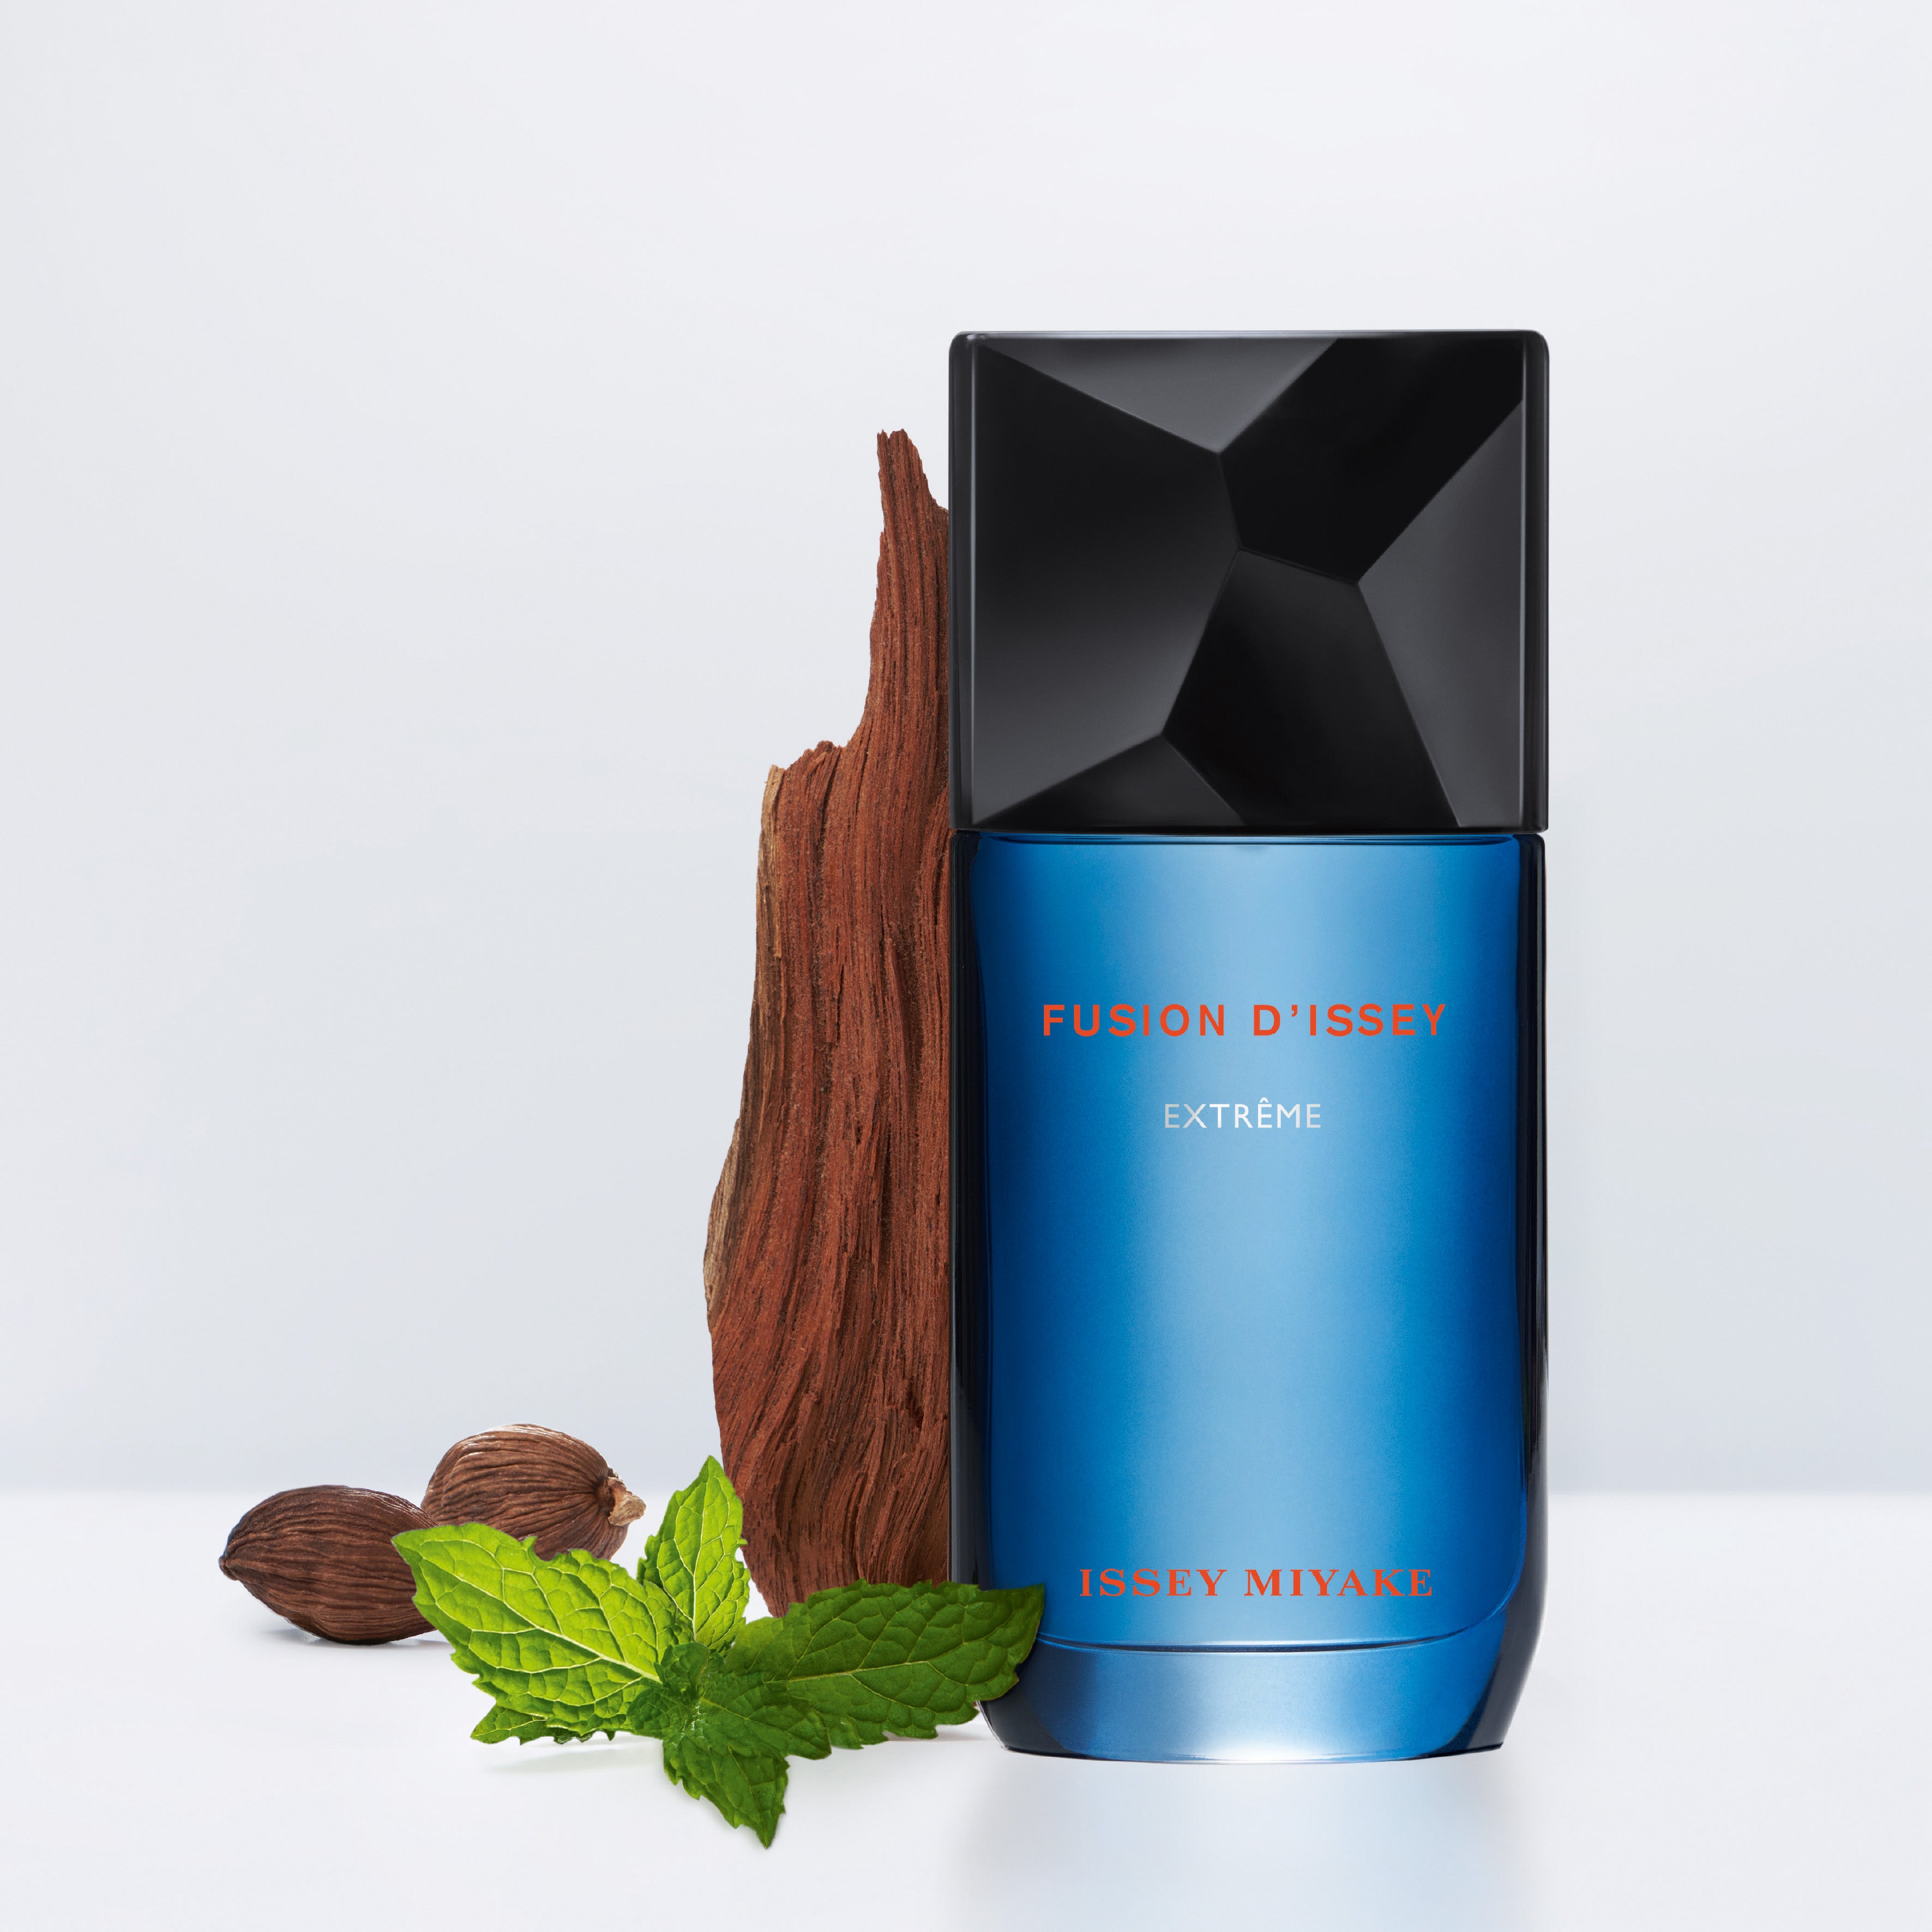 ISSEY MIYAKE Fusion D'Issey Extreme EDT 100ml